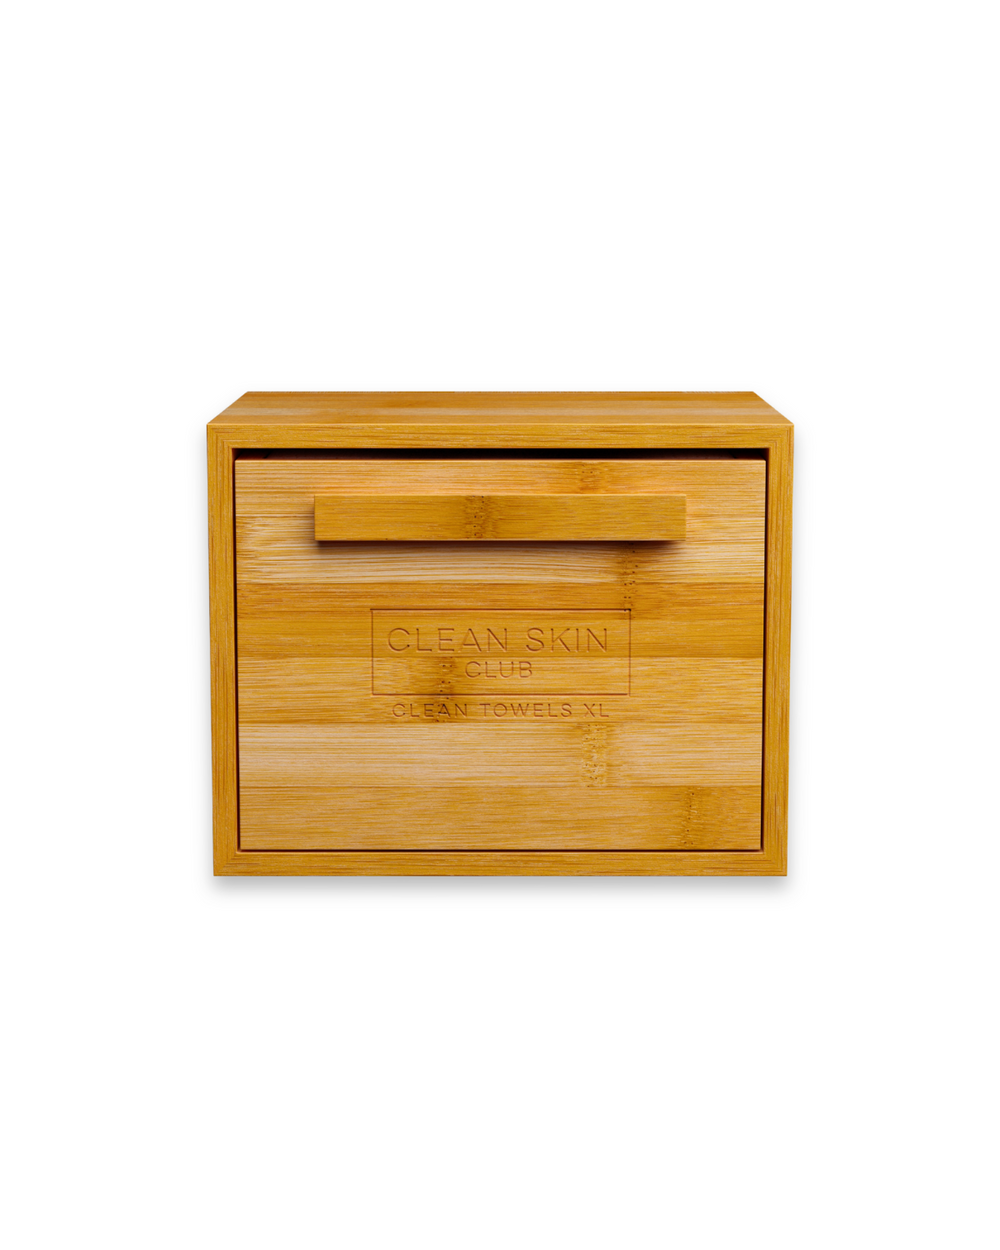 Clean Skin Club Luxe Bamboo Box with Drawer